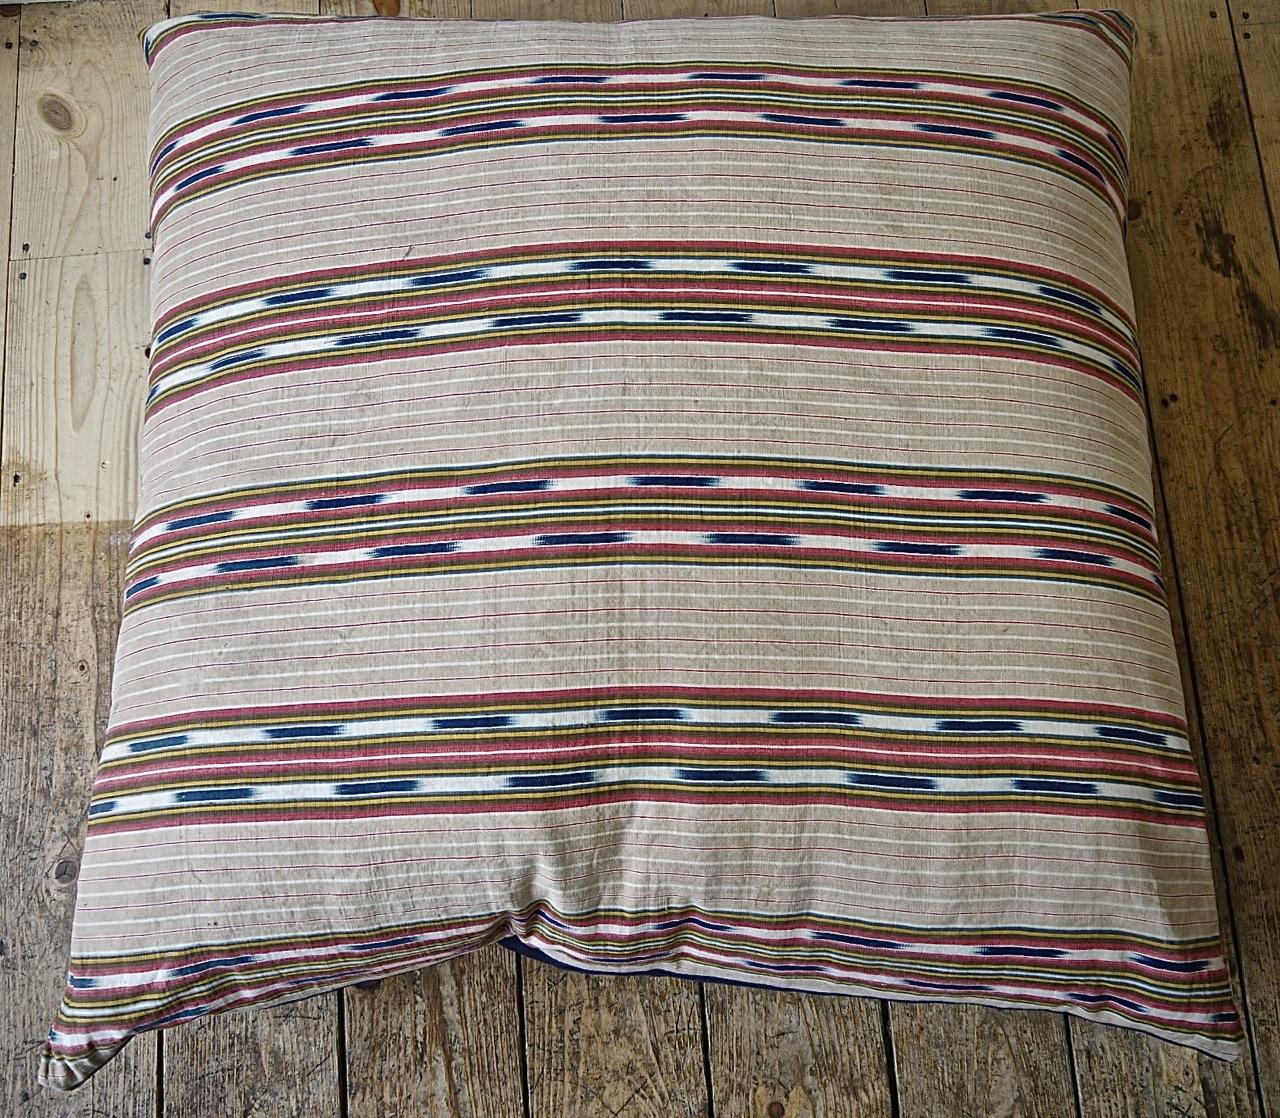 Late 19th century French floor cushion made from an interesting and unusual striped linen/cotton ticking with an indigo ikat detail.Stripes of faded beige, red and yellow with the indigo ikat floating in between.Backed in a vintage denim cloth with